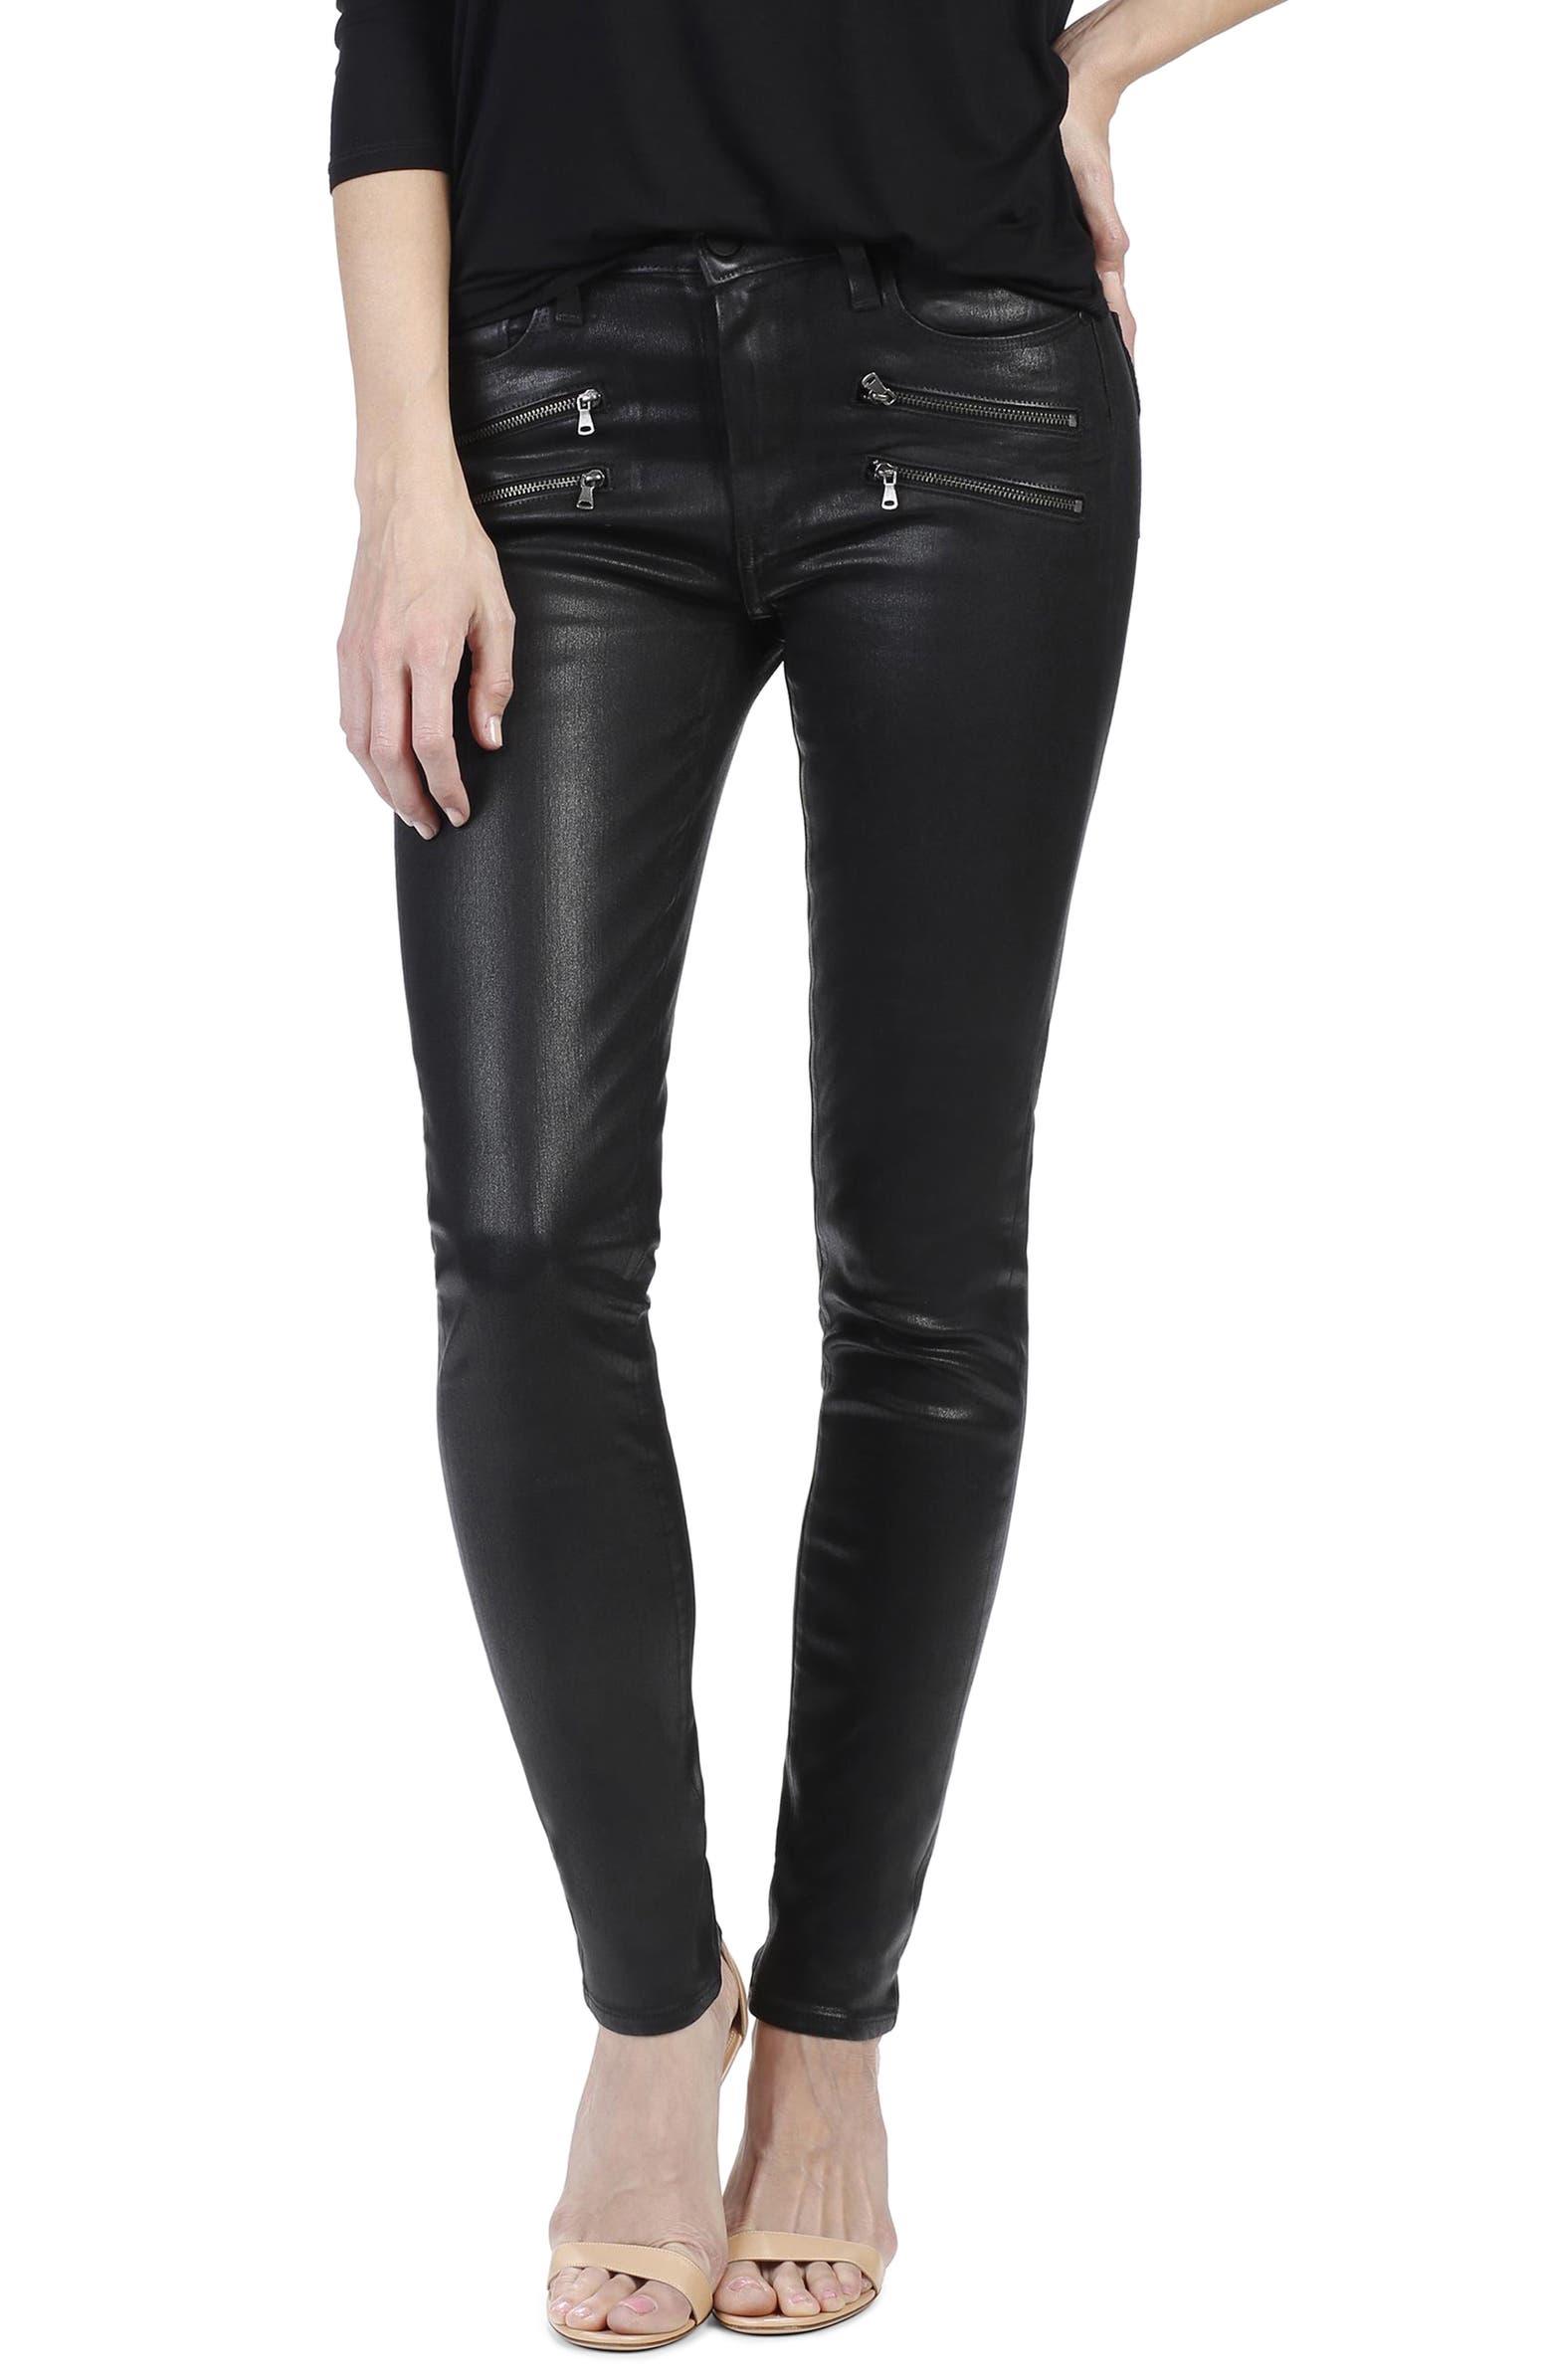 PAIGE Edgemont Zip Coated High Waist Ultra Skinny Jeans | Nordstrom